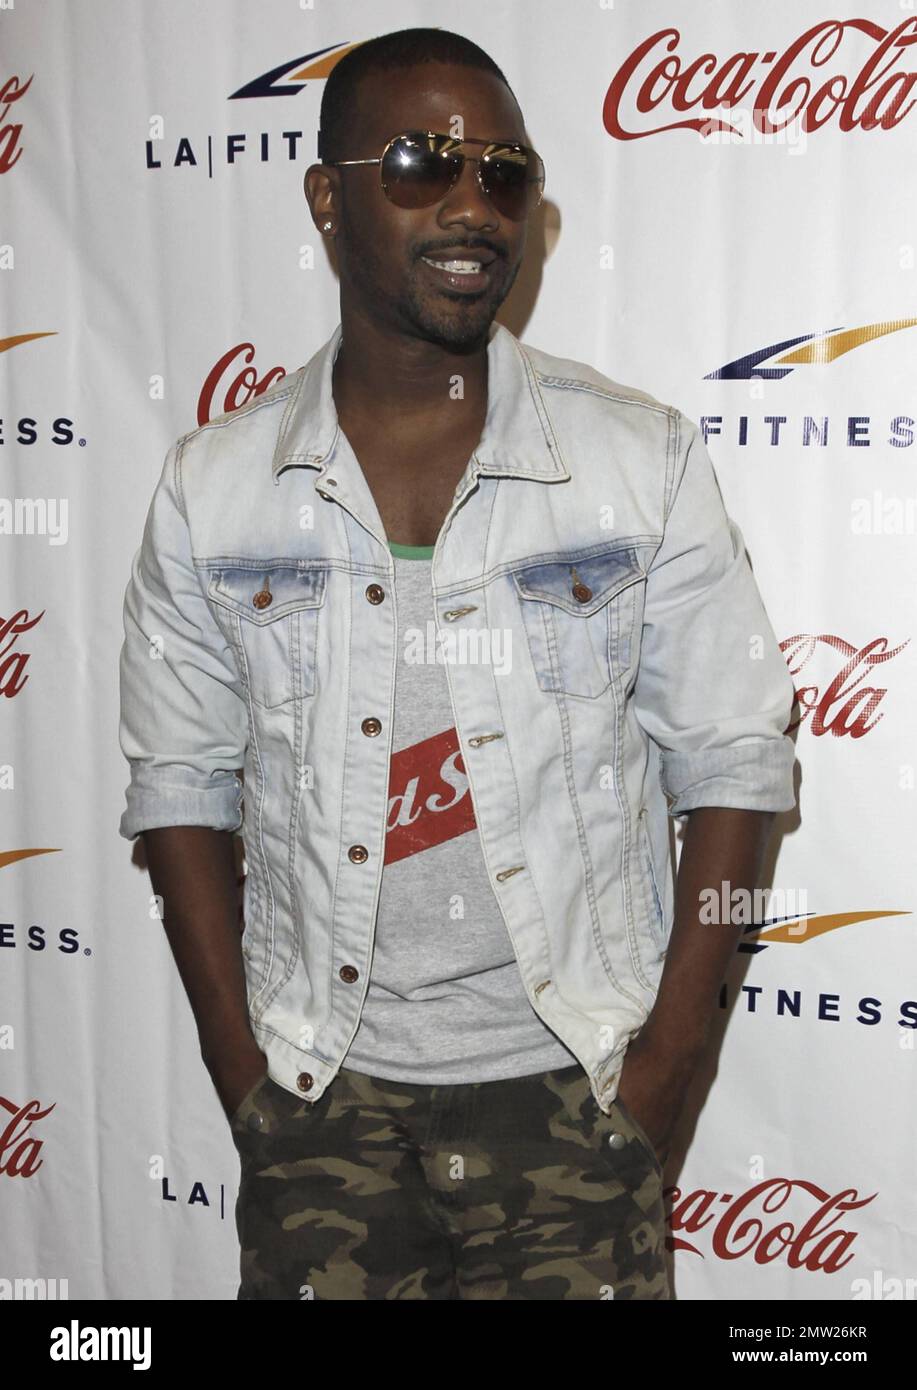 https://c8.alamy.com/comp/2MW26KR/ray-j-at-the-signature-la-fitness-grand-opening-in-woodland-hills-for-the-vip-reception-los-angeles-ca-2nd-june-2012-2MW26KR.jpg